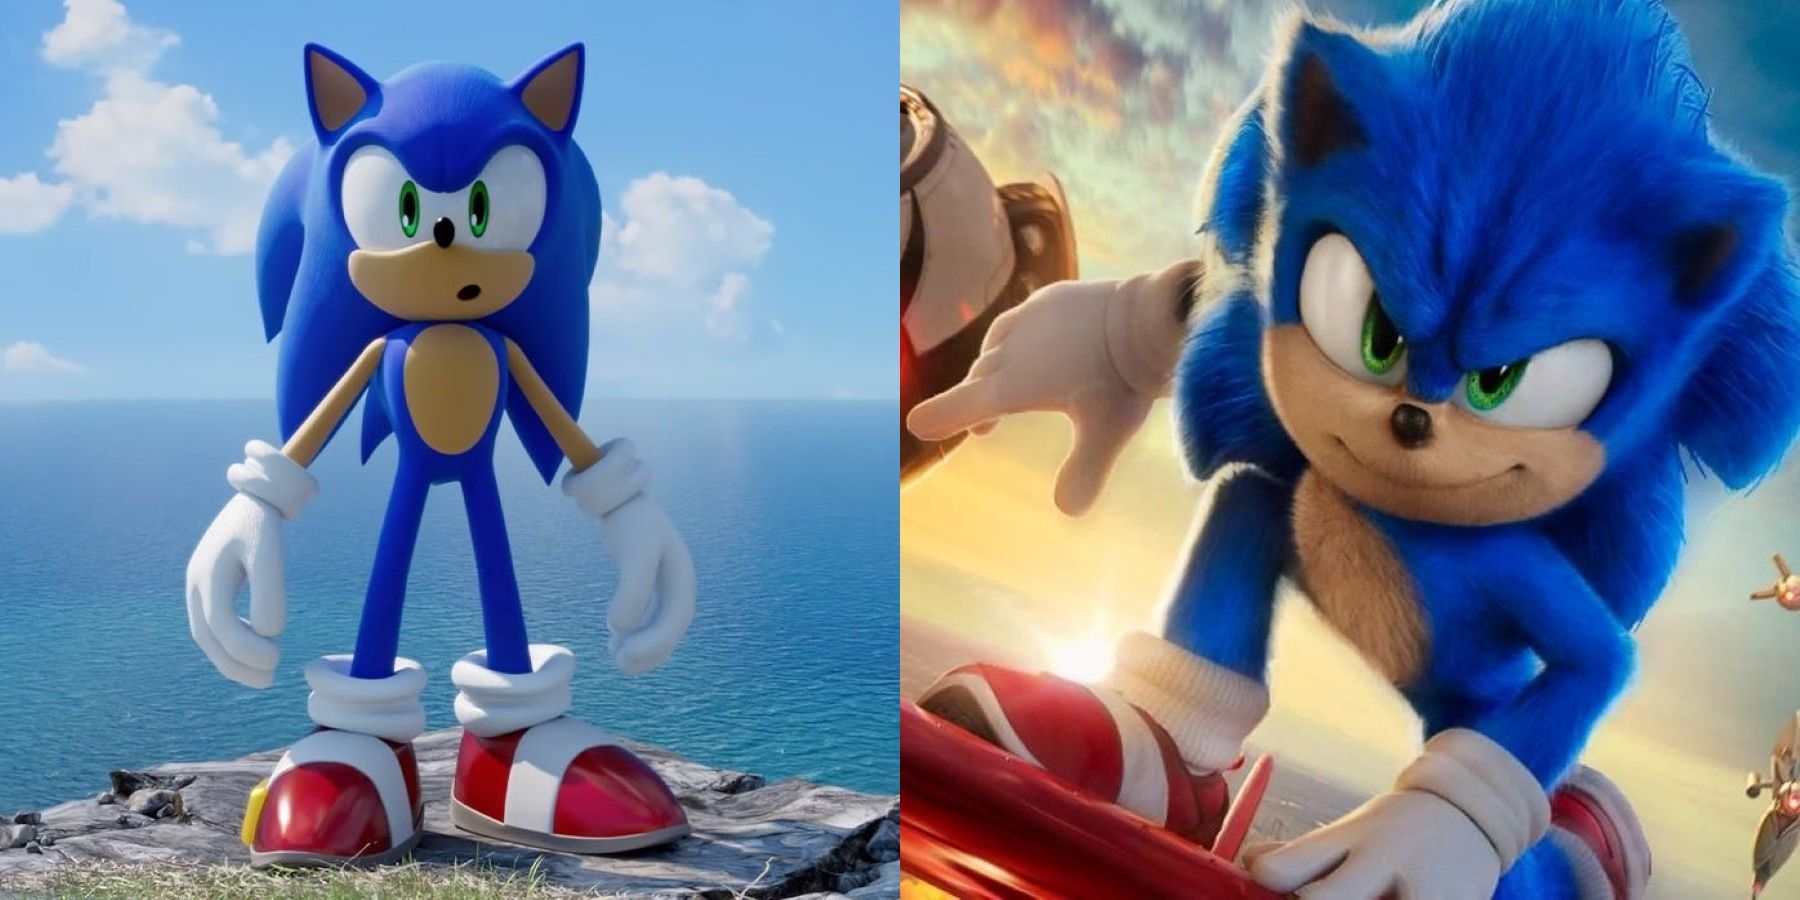 Sonic the Hedgehog in Sonic Frontiers and the Sonic movie